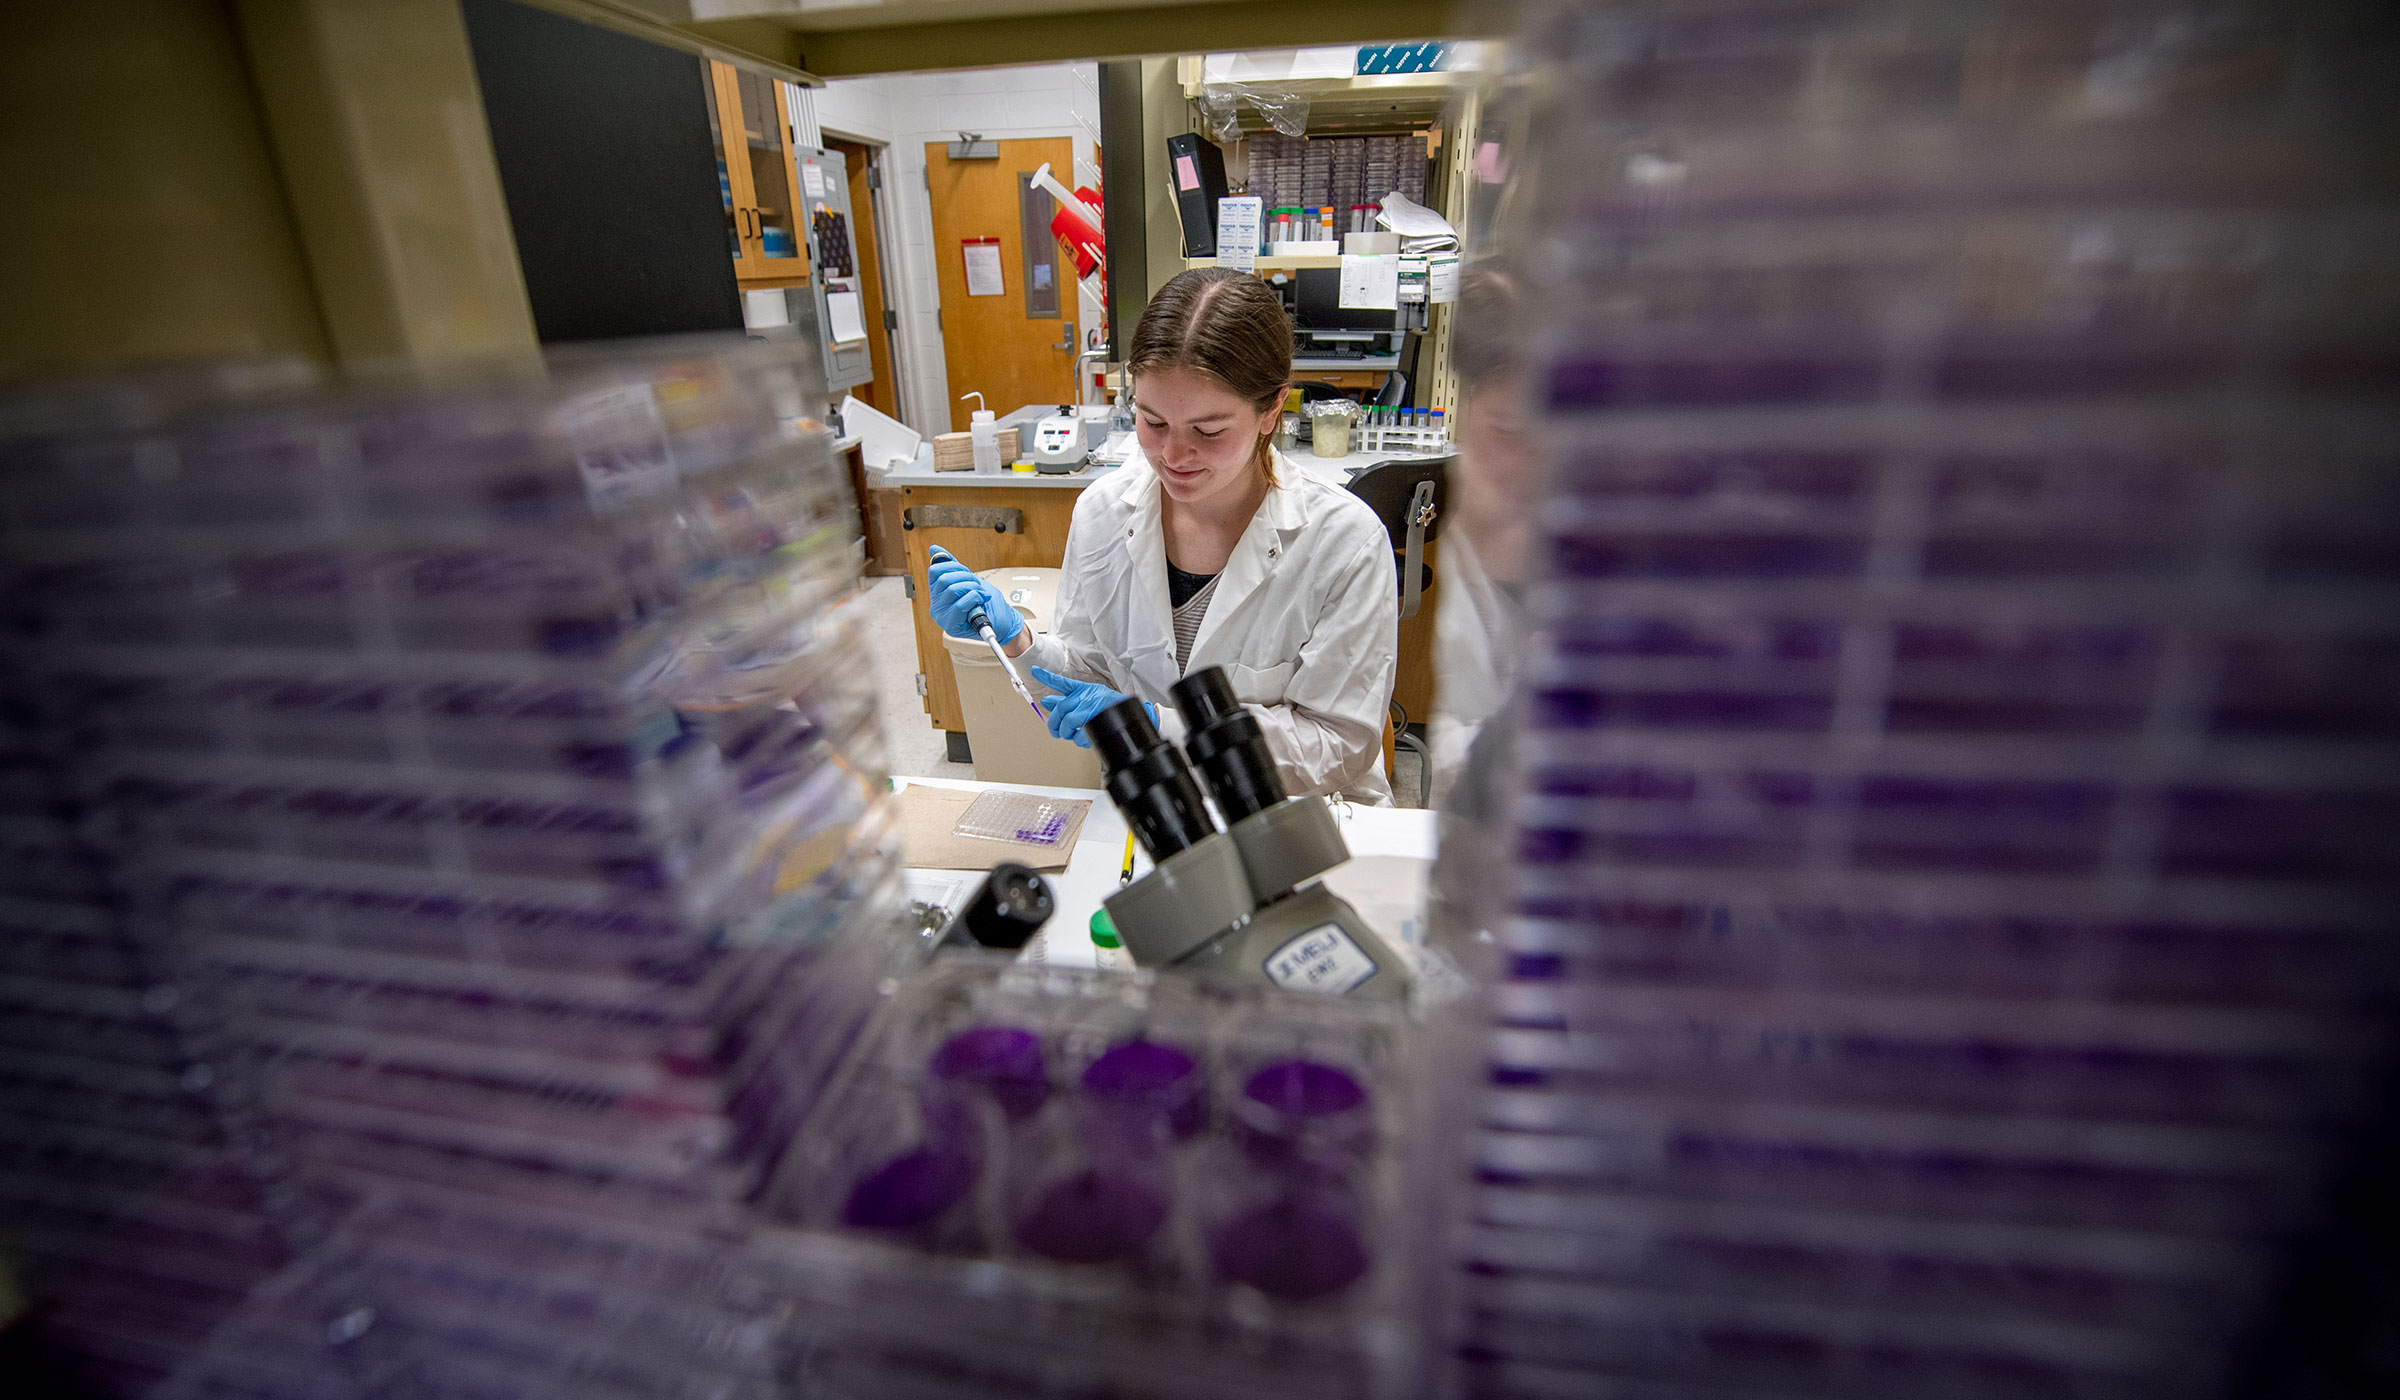 Female student in lab coat and gloves using pipette with purple slides in foreground